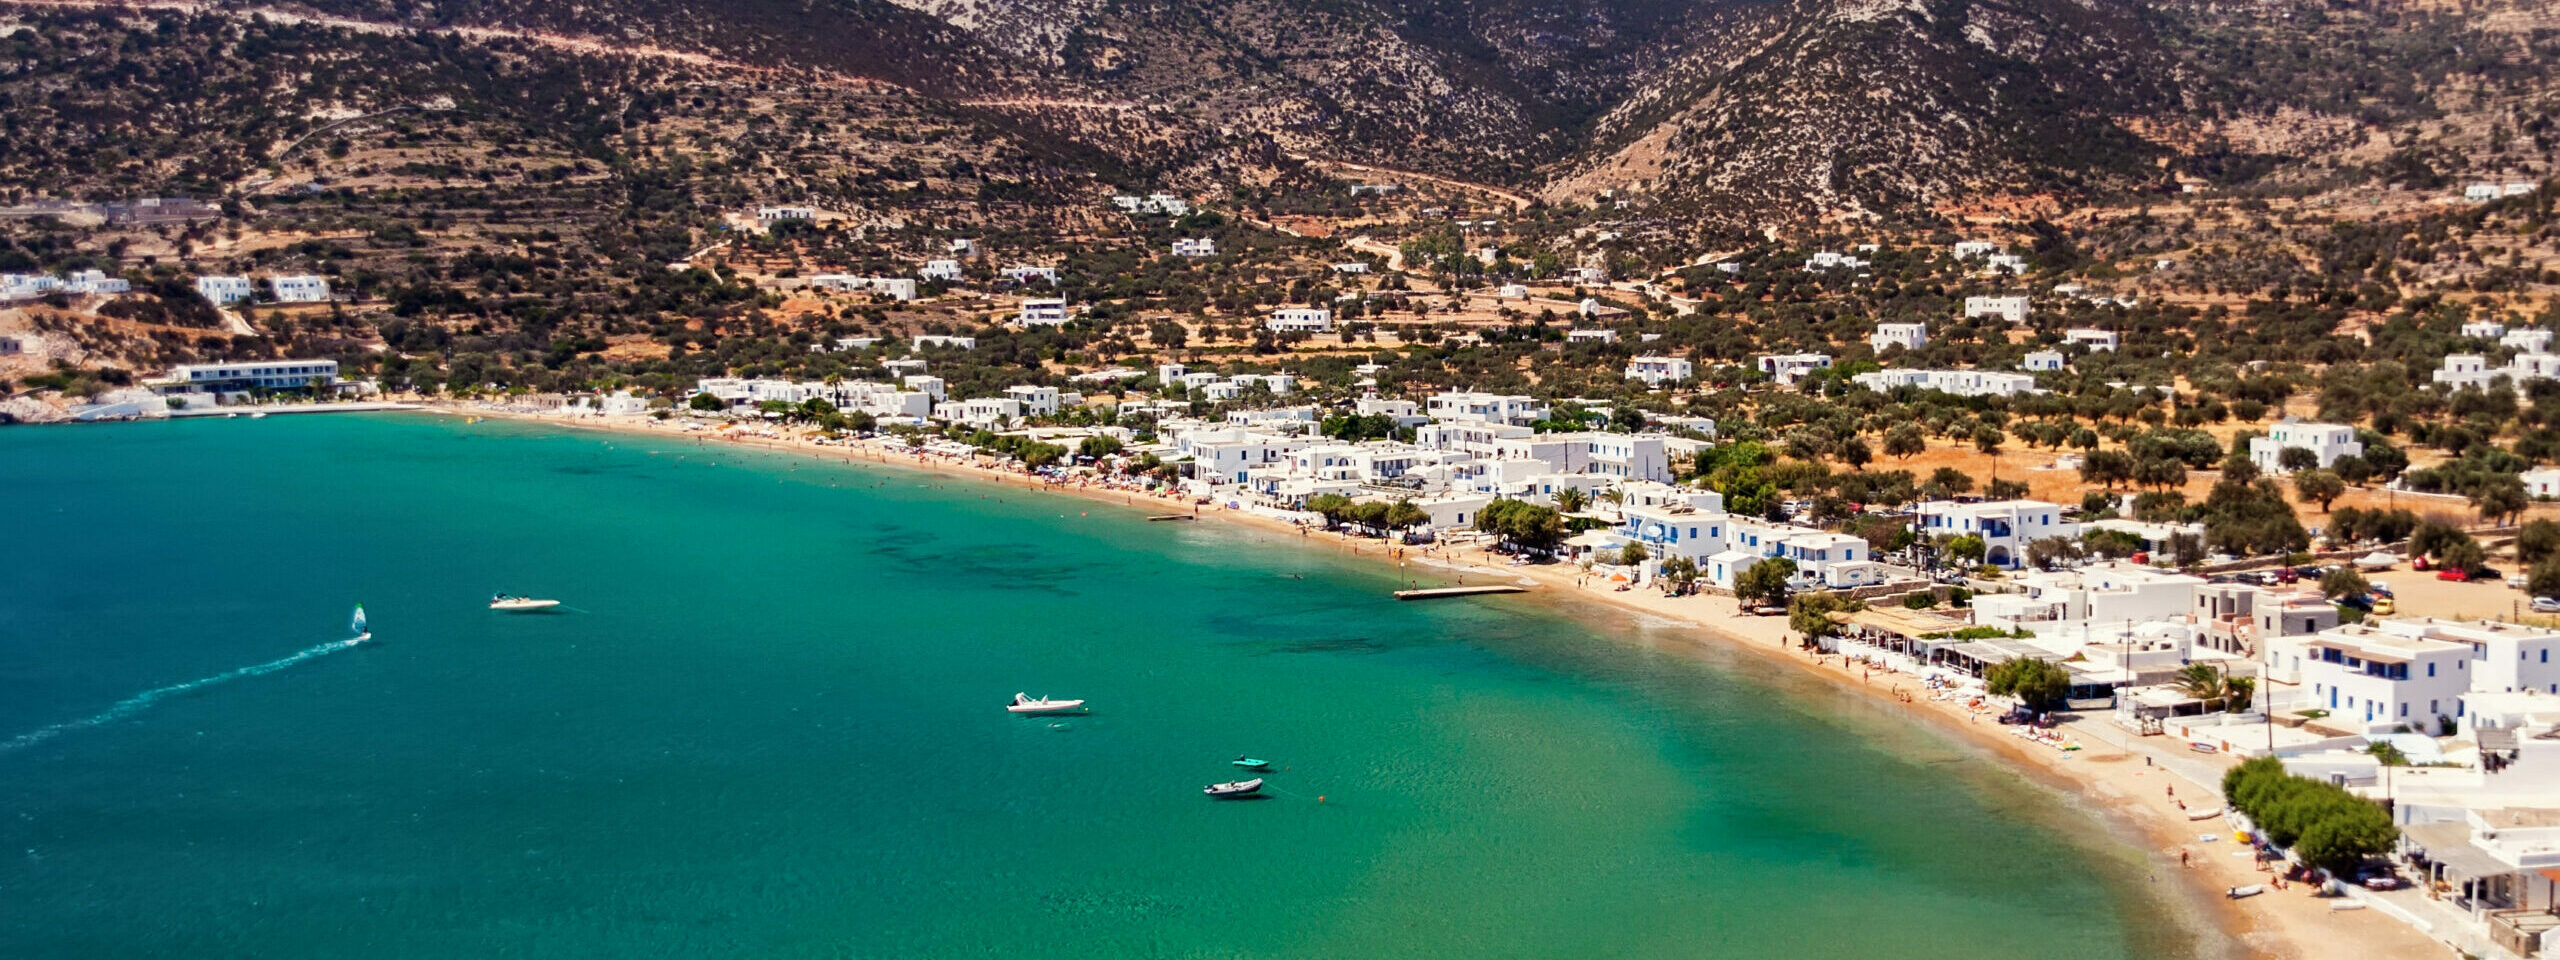 Five great reasons for a holiday on Sifnos